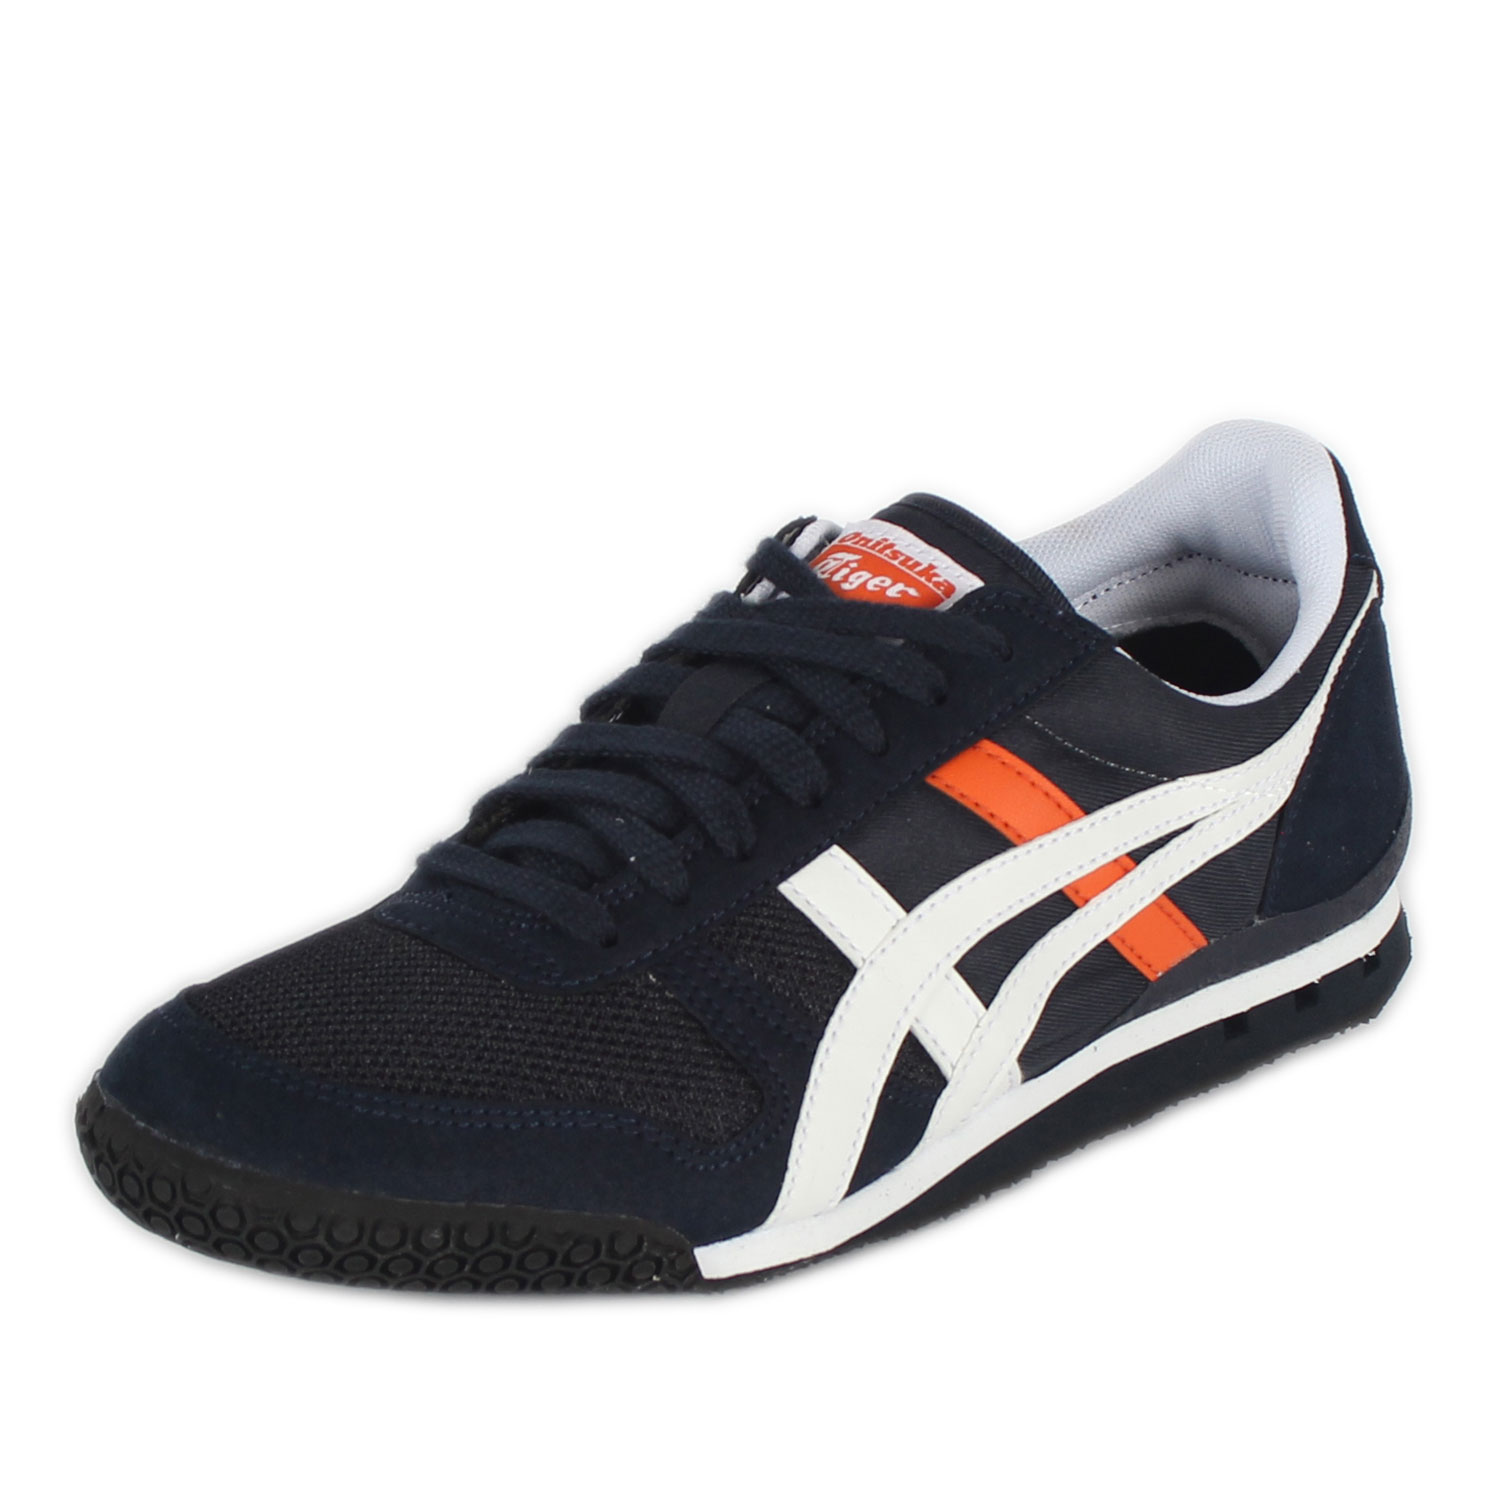 Asics - Mens Onitsuka Tiger Ultimate 81 Shoes In Dark Navy/White